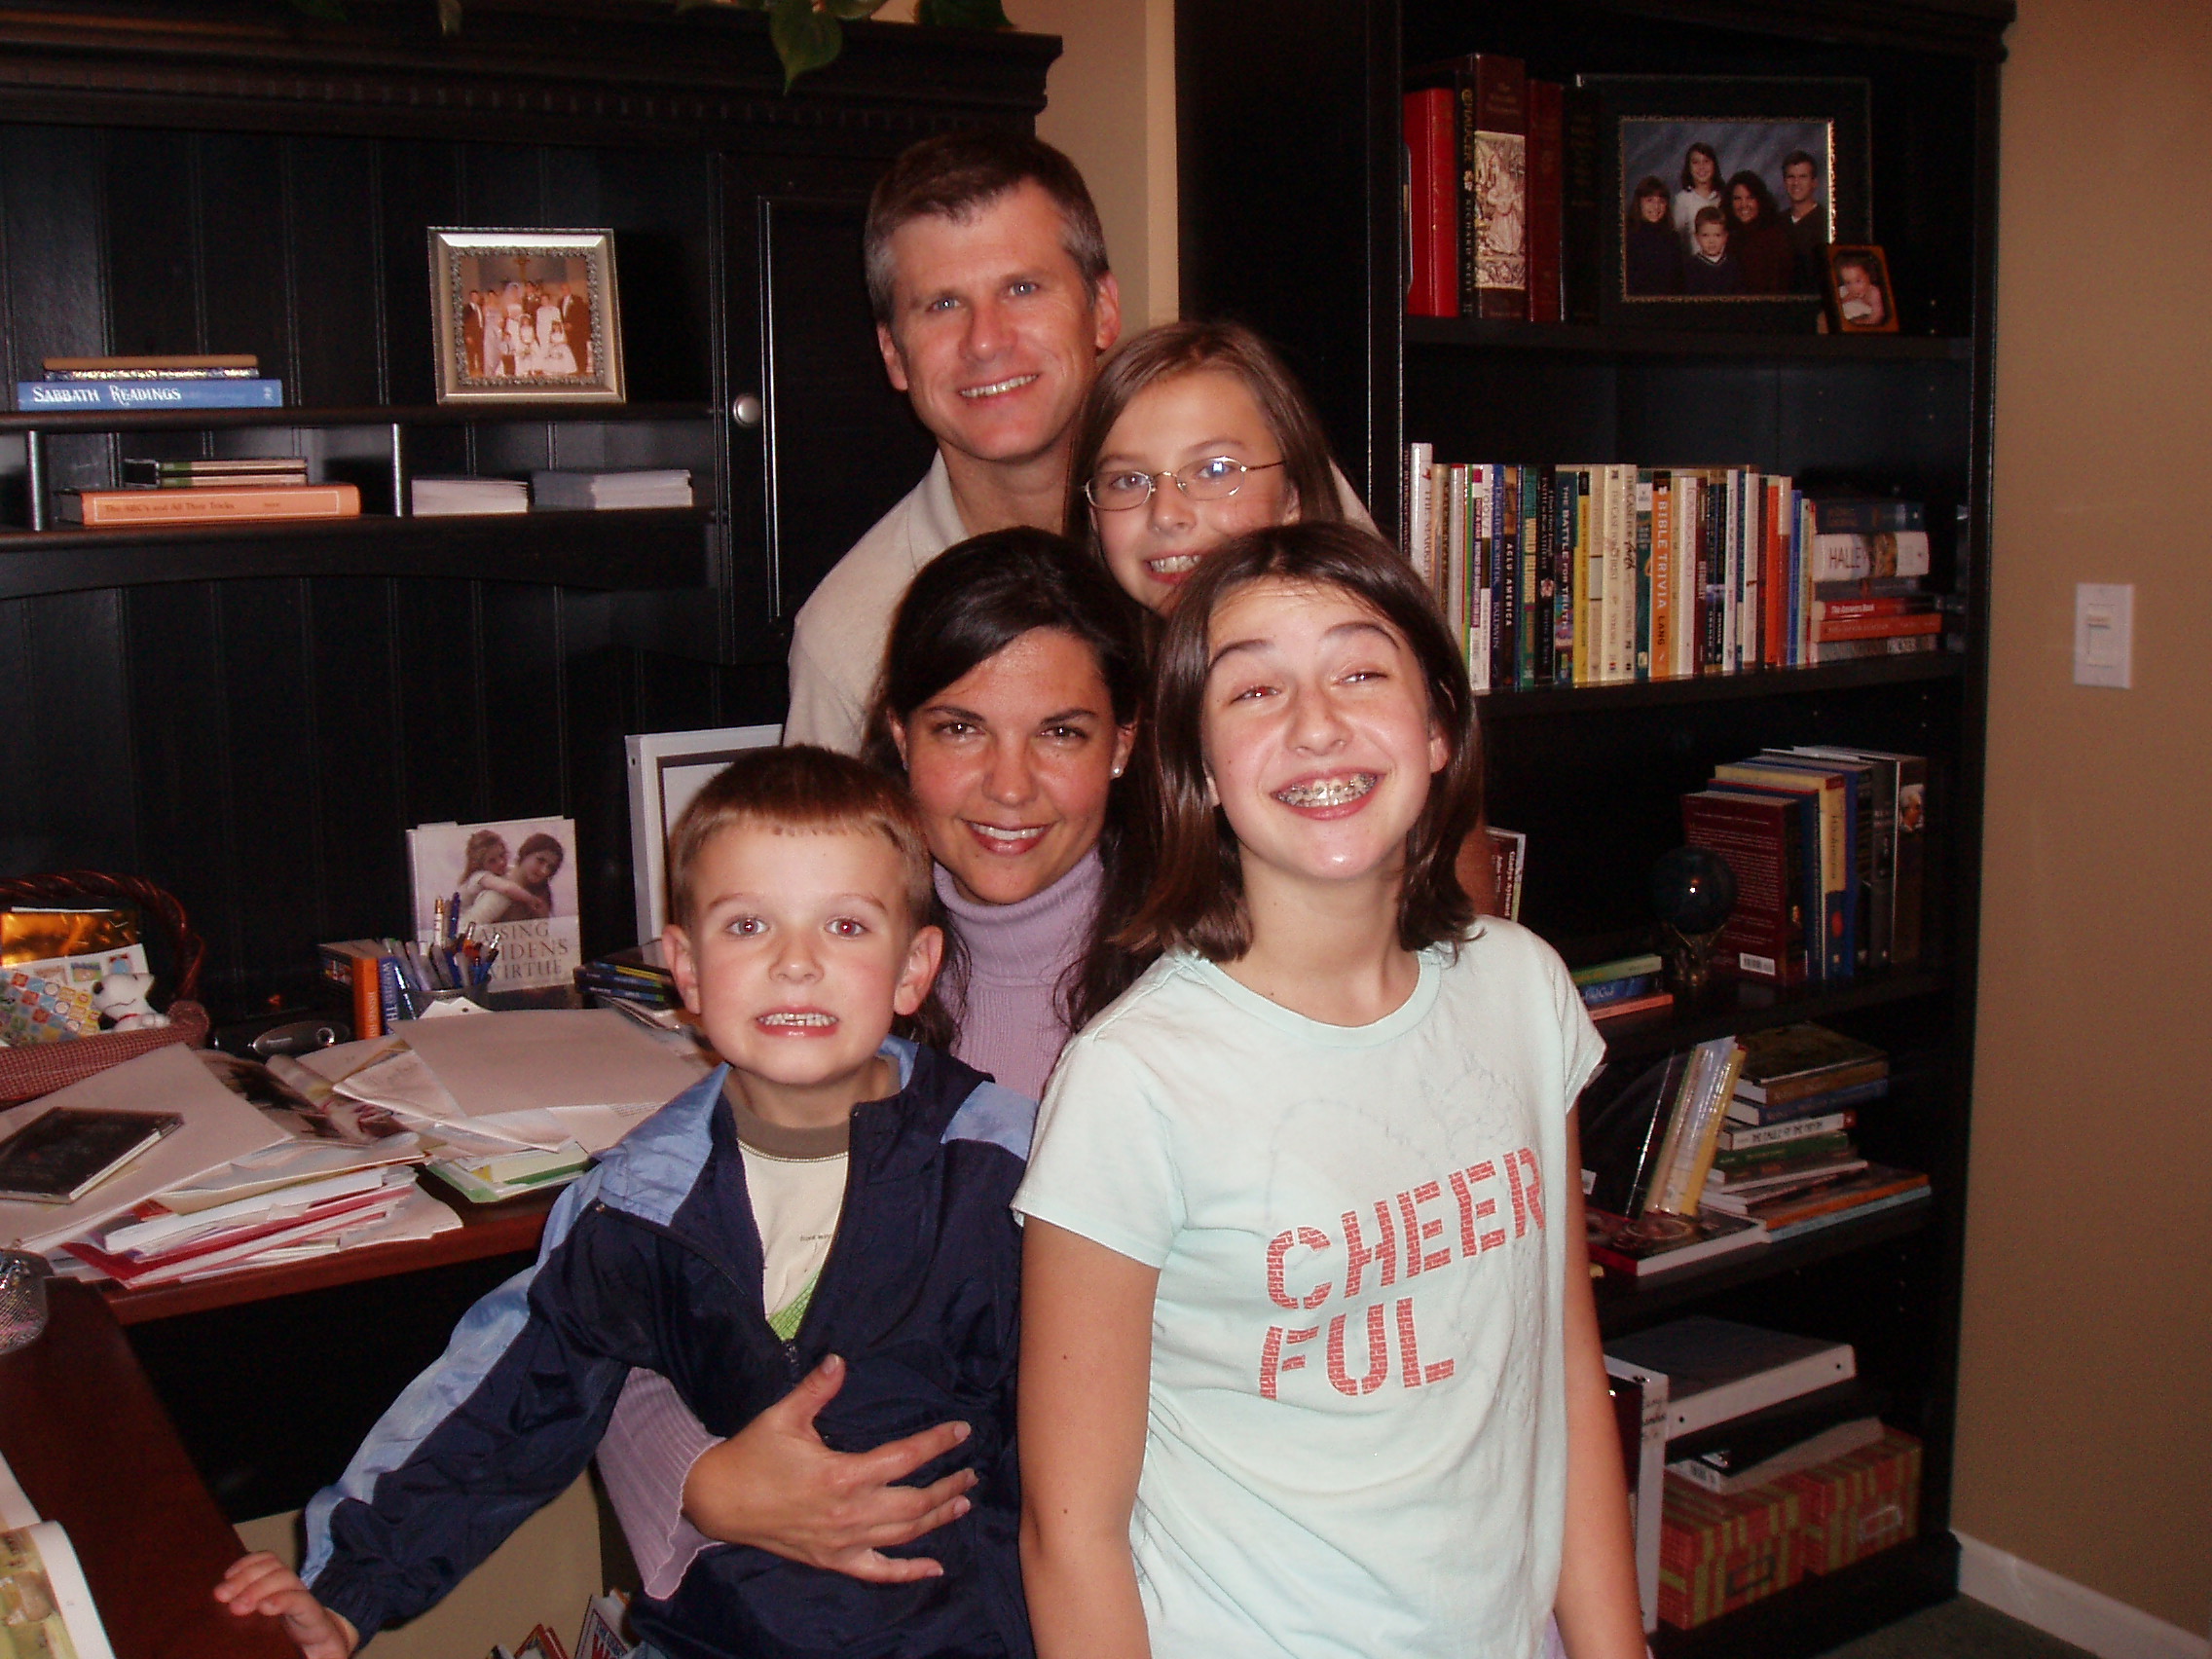 Education coach Dr. Beverly Pell and her family in 2007, while she was homeschooling her three children.